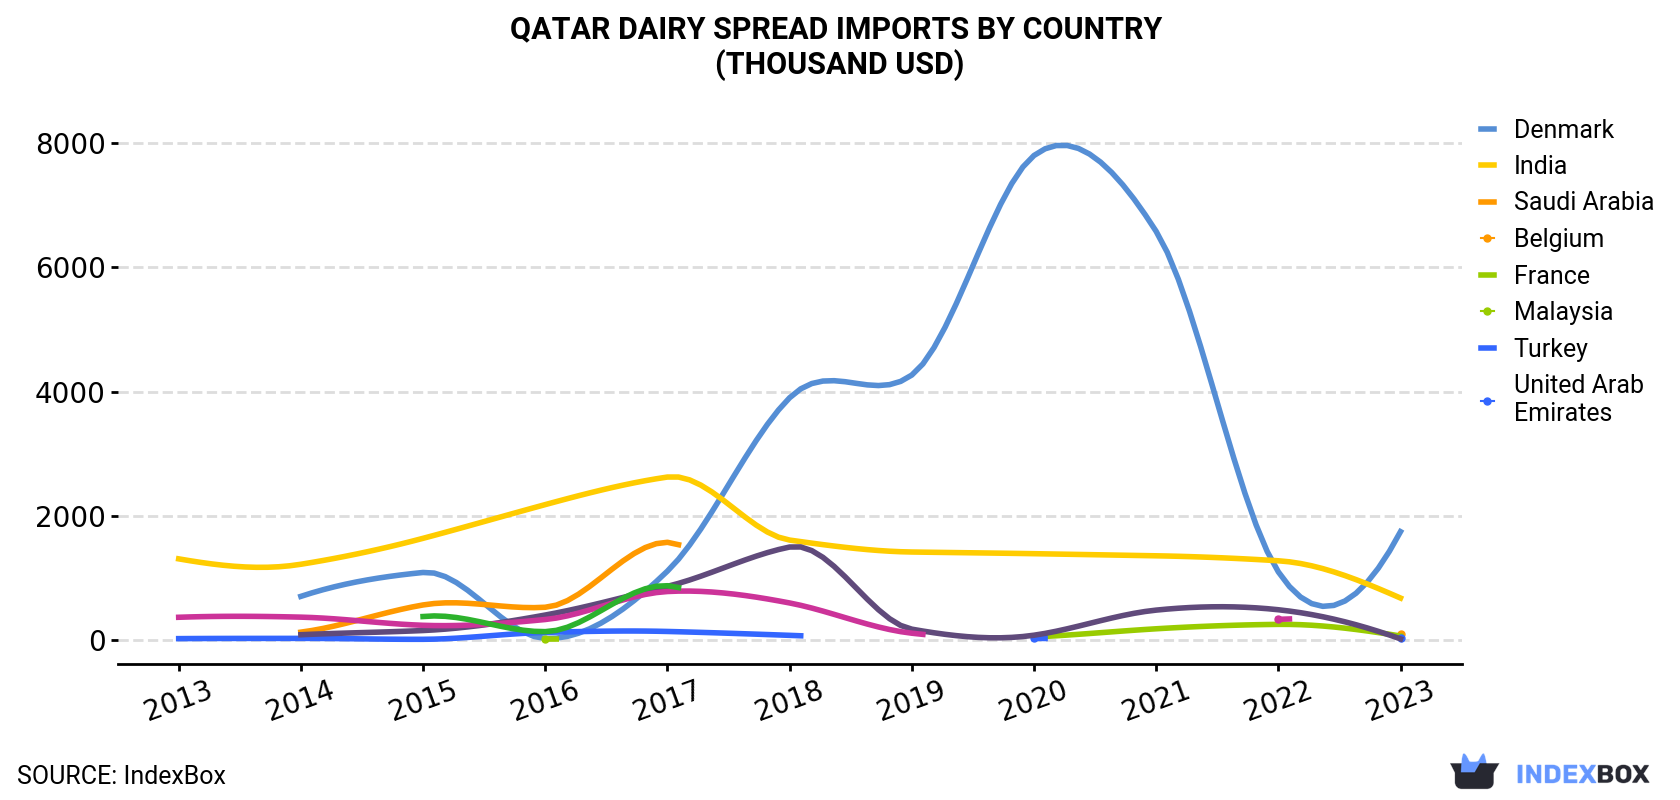 Qatar Dairy Spread Imports By Country (Thousand USD)